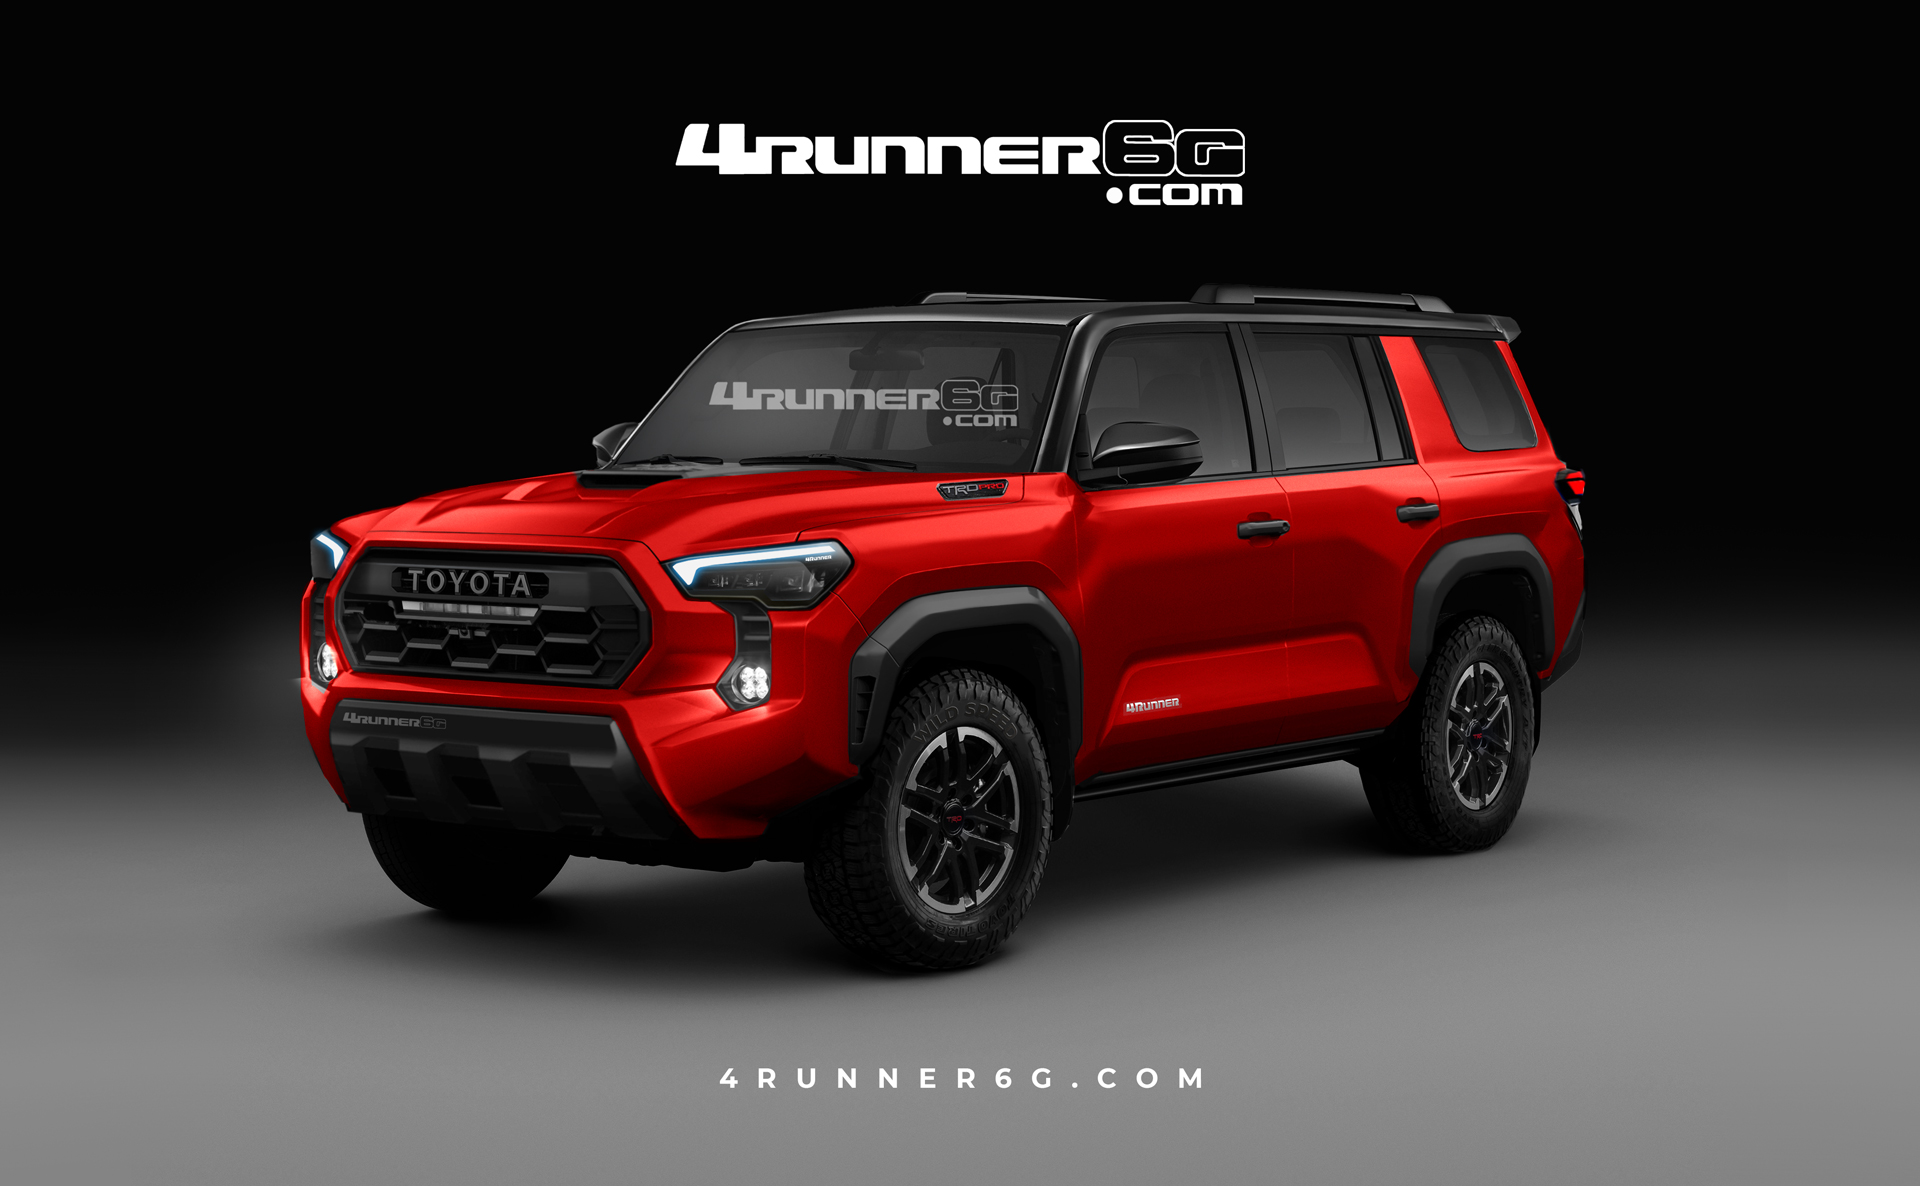 2025 Toyota 4runner 2025 4Runner (6th Gen) News, Specs, Engines, Release Date, Production Date & Preview Renderings -- Insider Info (as of 7/30/23) 2025 Toyota-4Runner-Front-S-Red